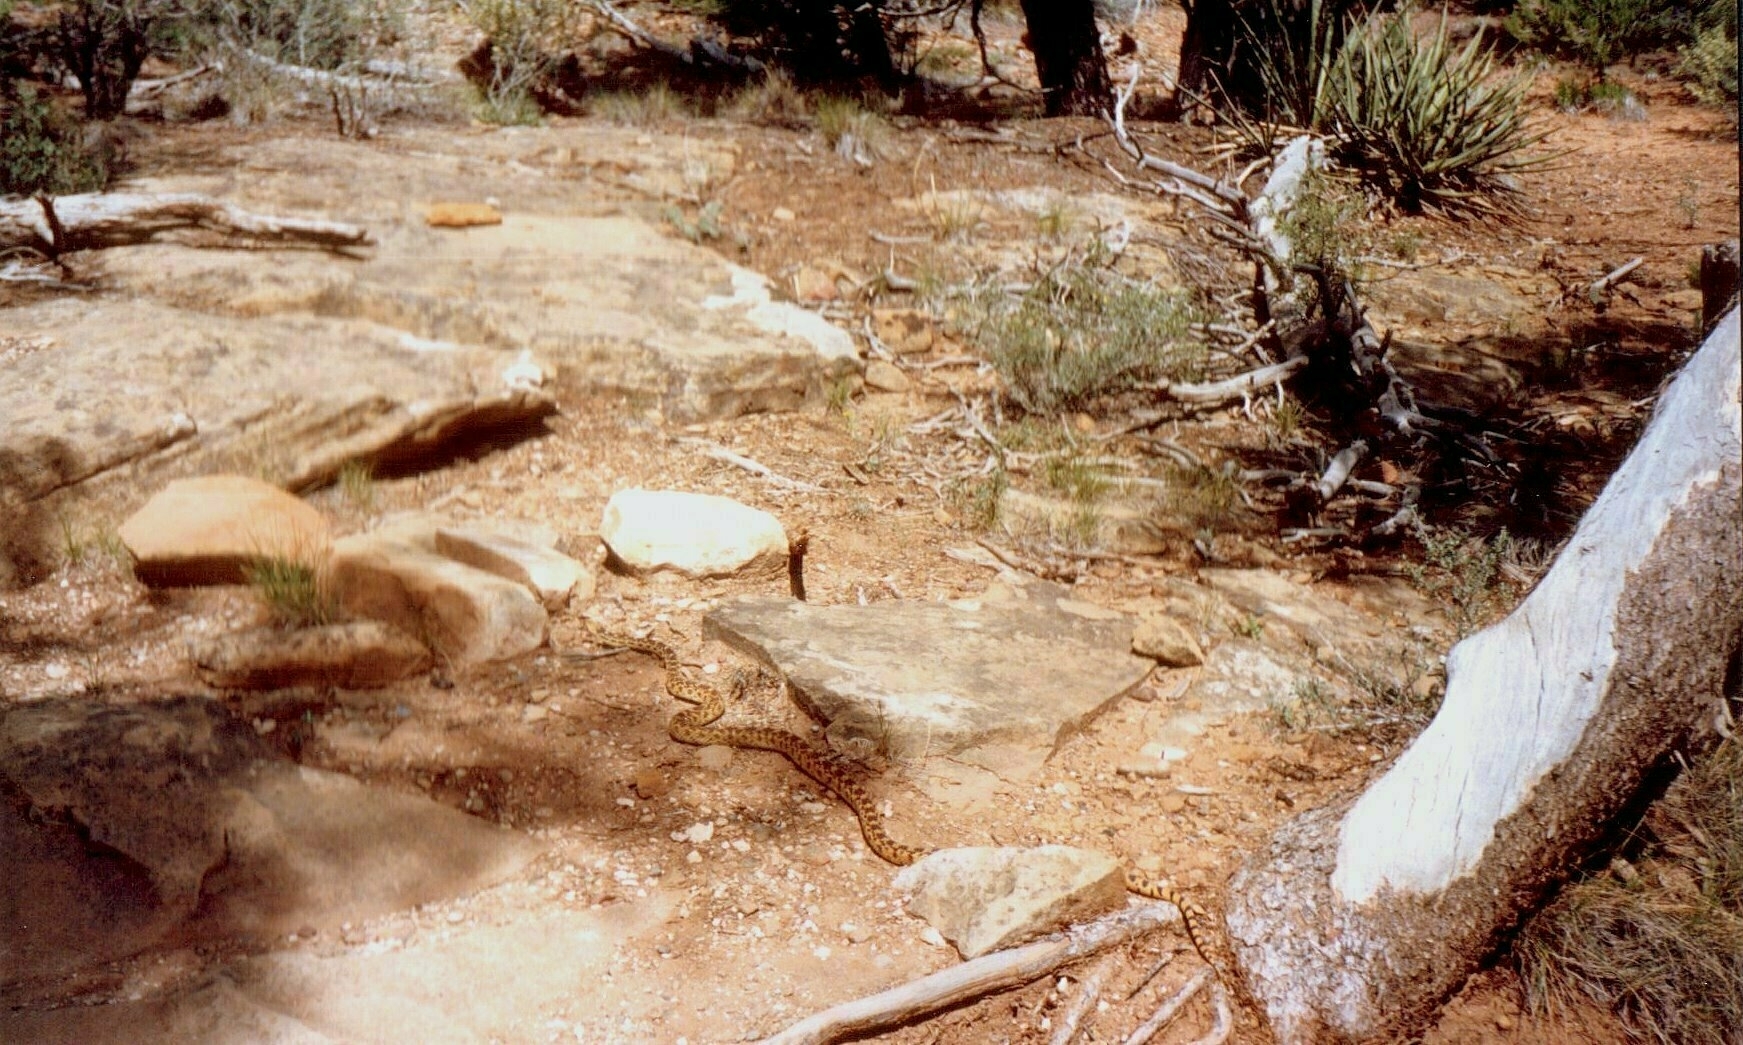 Walking through Mesa Verde National Park, random rocks and scrub, plus a large snake scuttling by with markings similar to a Rattlesnake or a Pine snake.